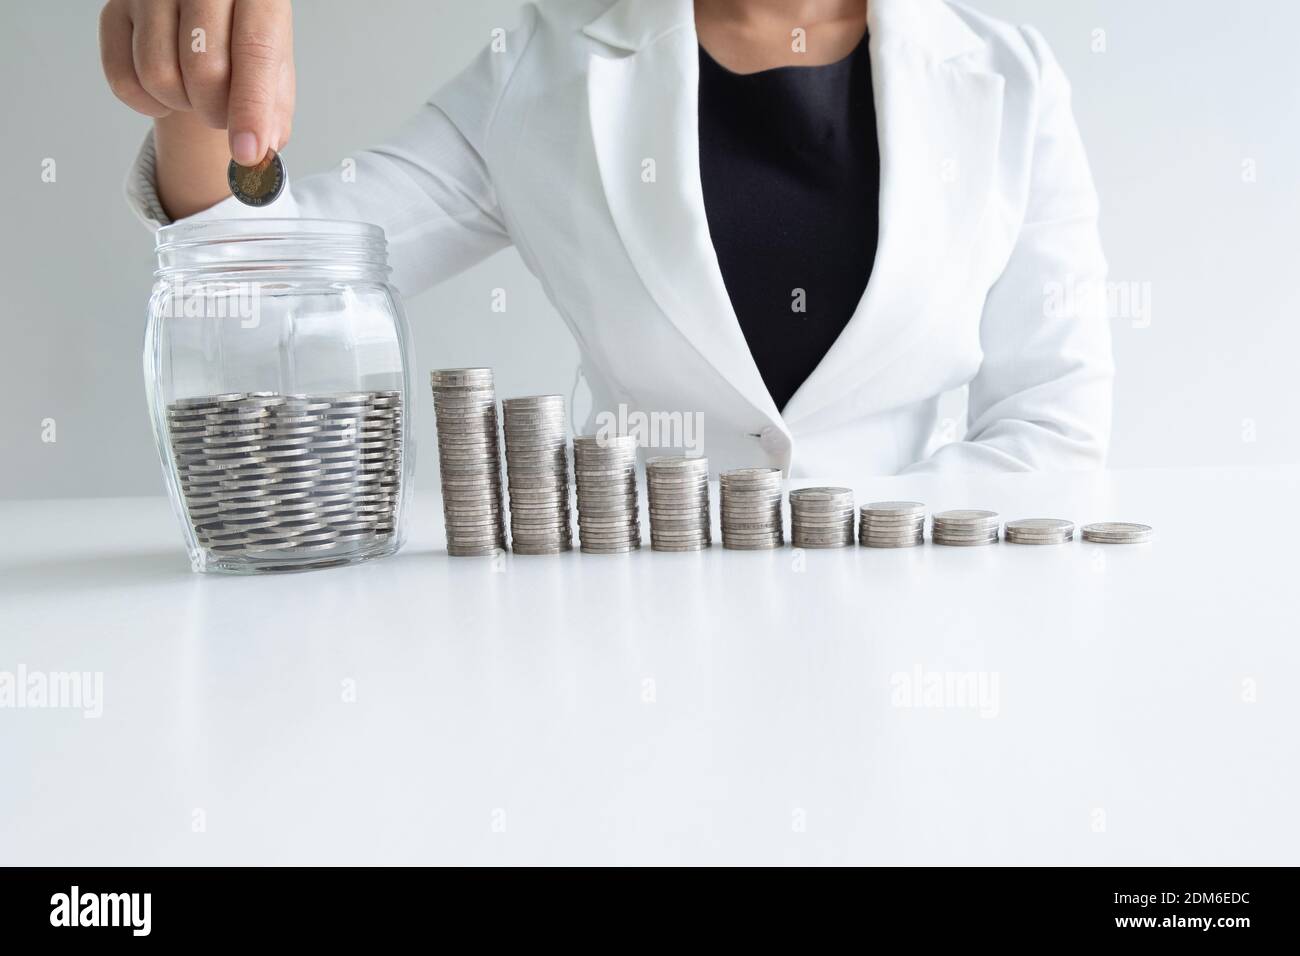 Midsection Of Businesswoman Putting Coin In Jar At Desk Against White Background Stock Photo